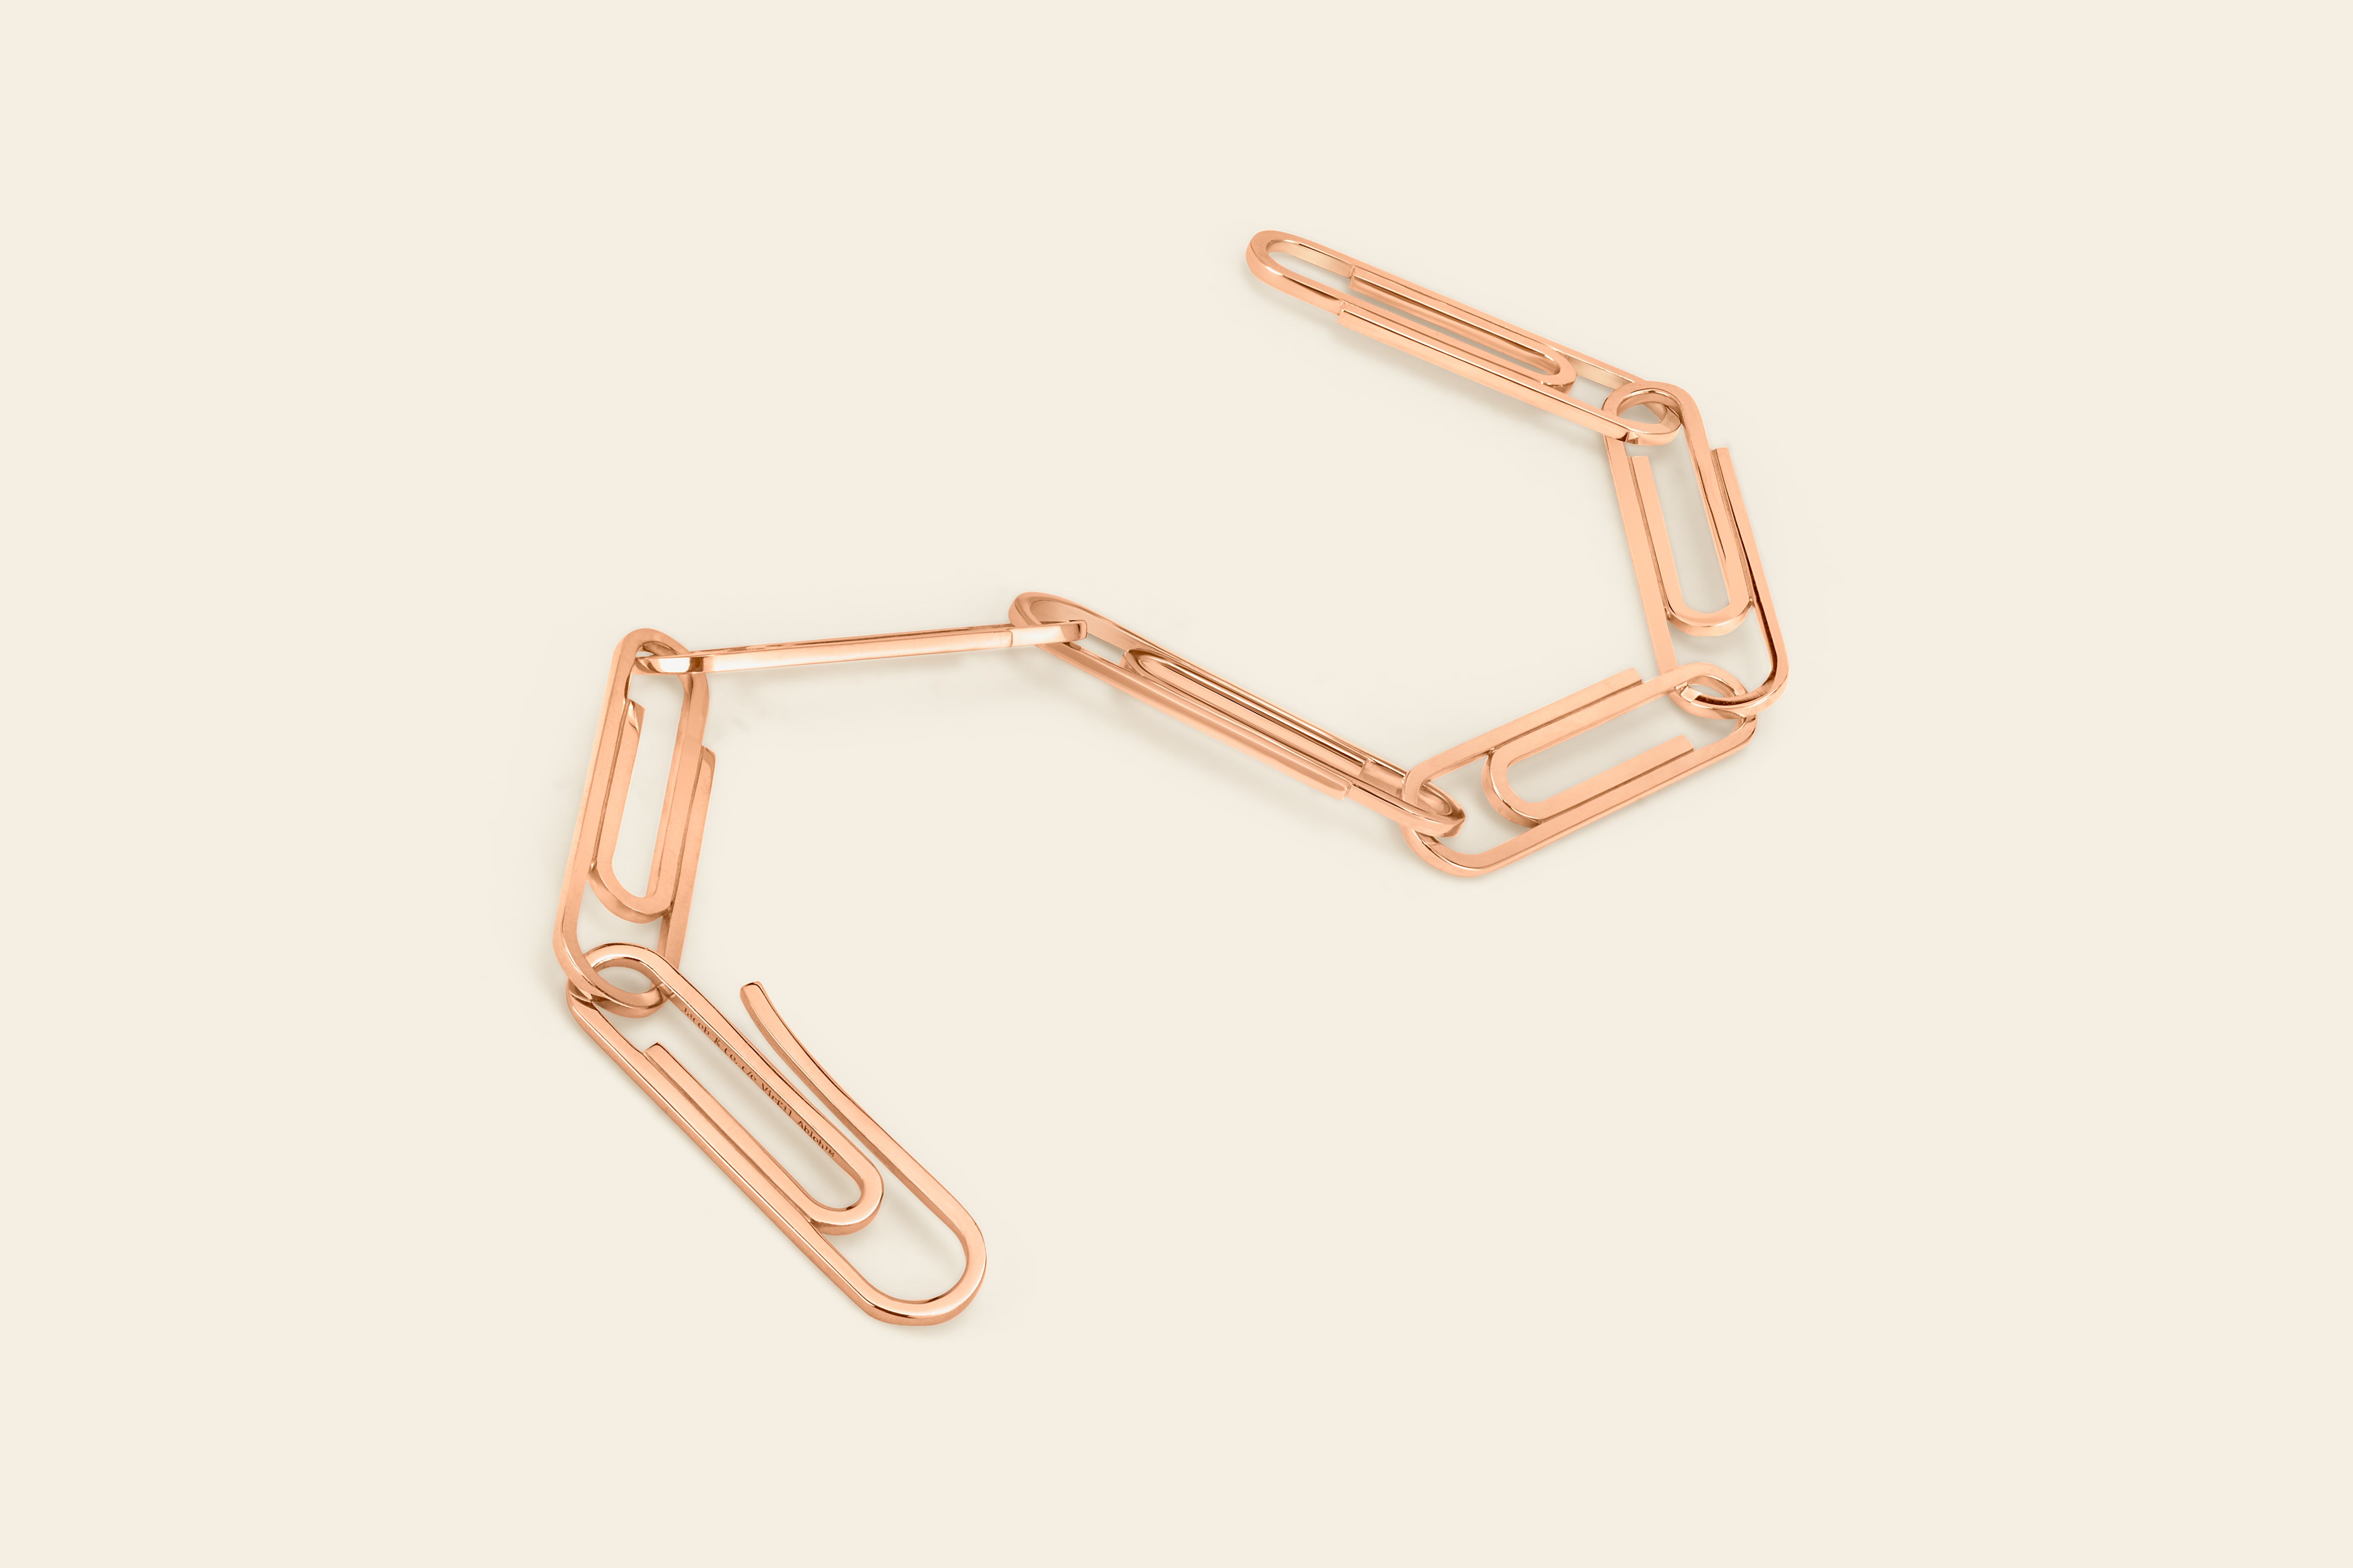 Virgil Abloh x Jacob & Co. Office Supplies Jewelry Collection